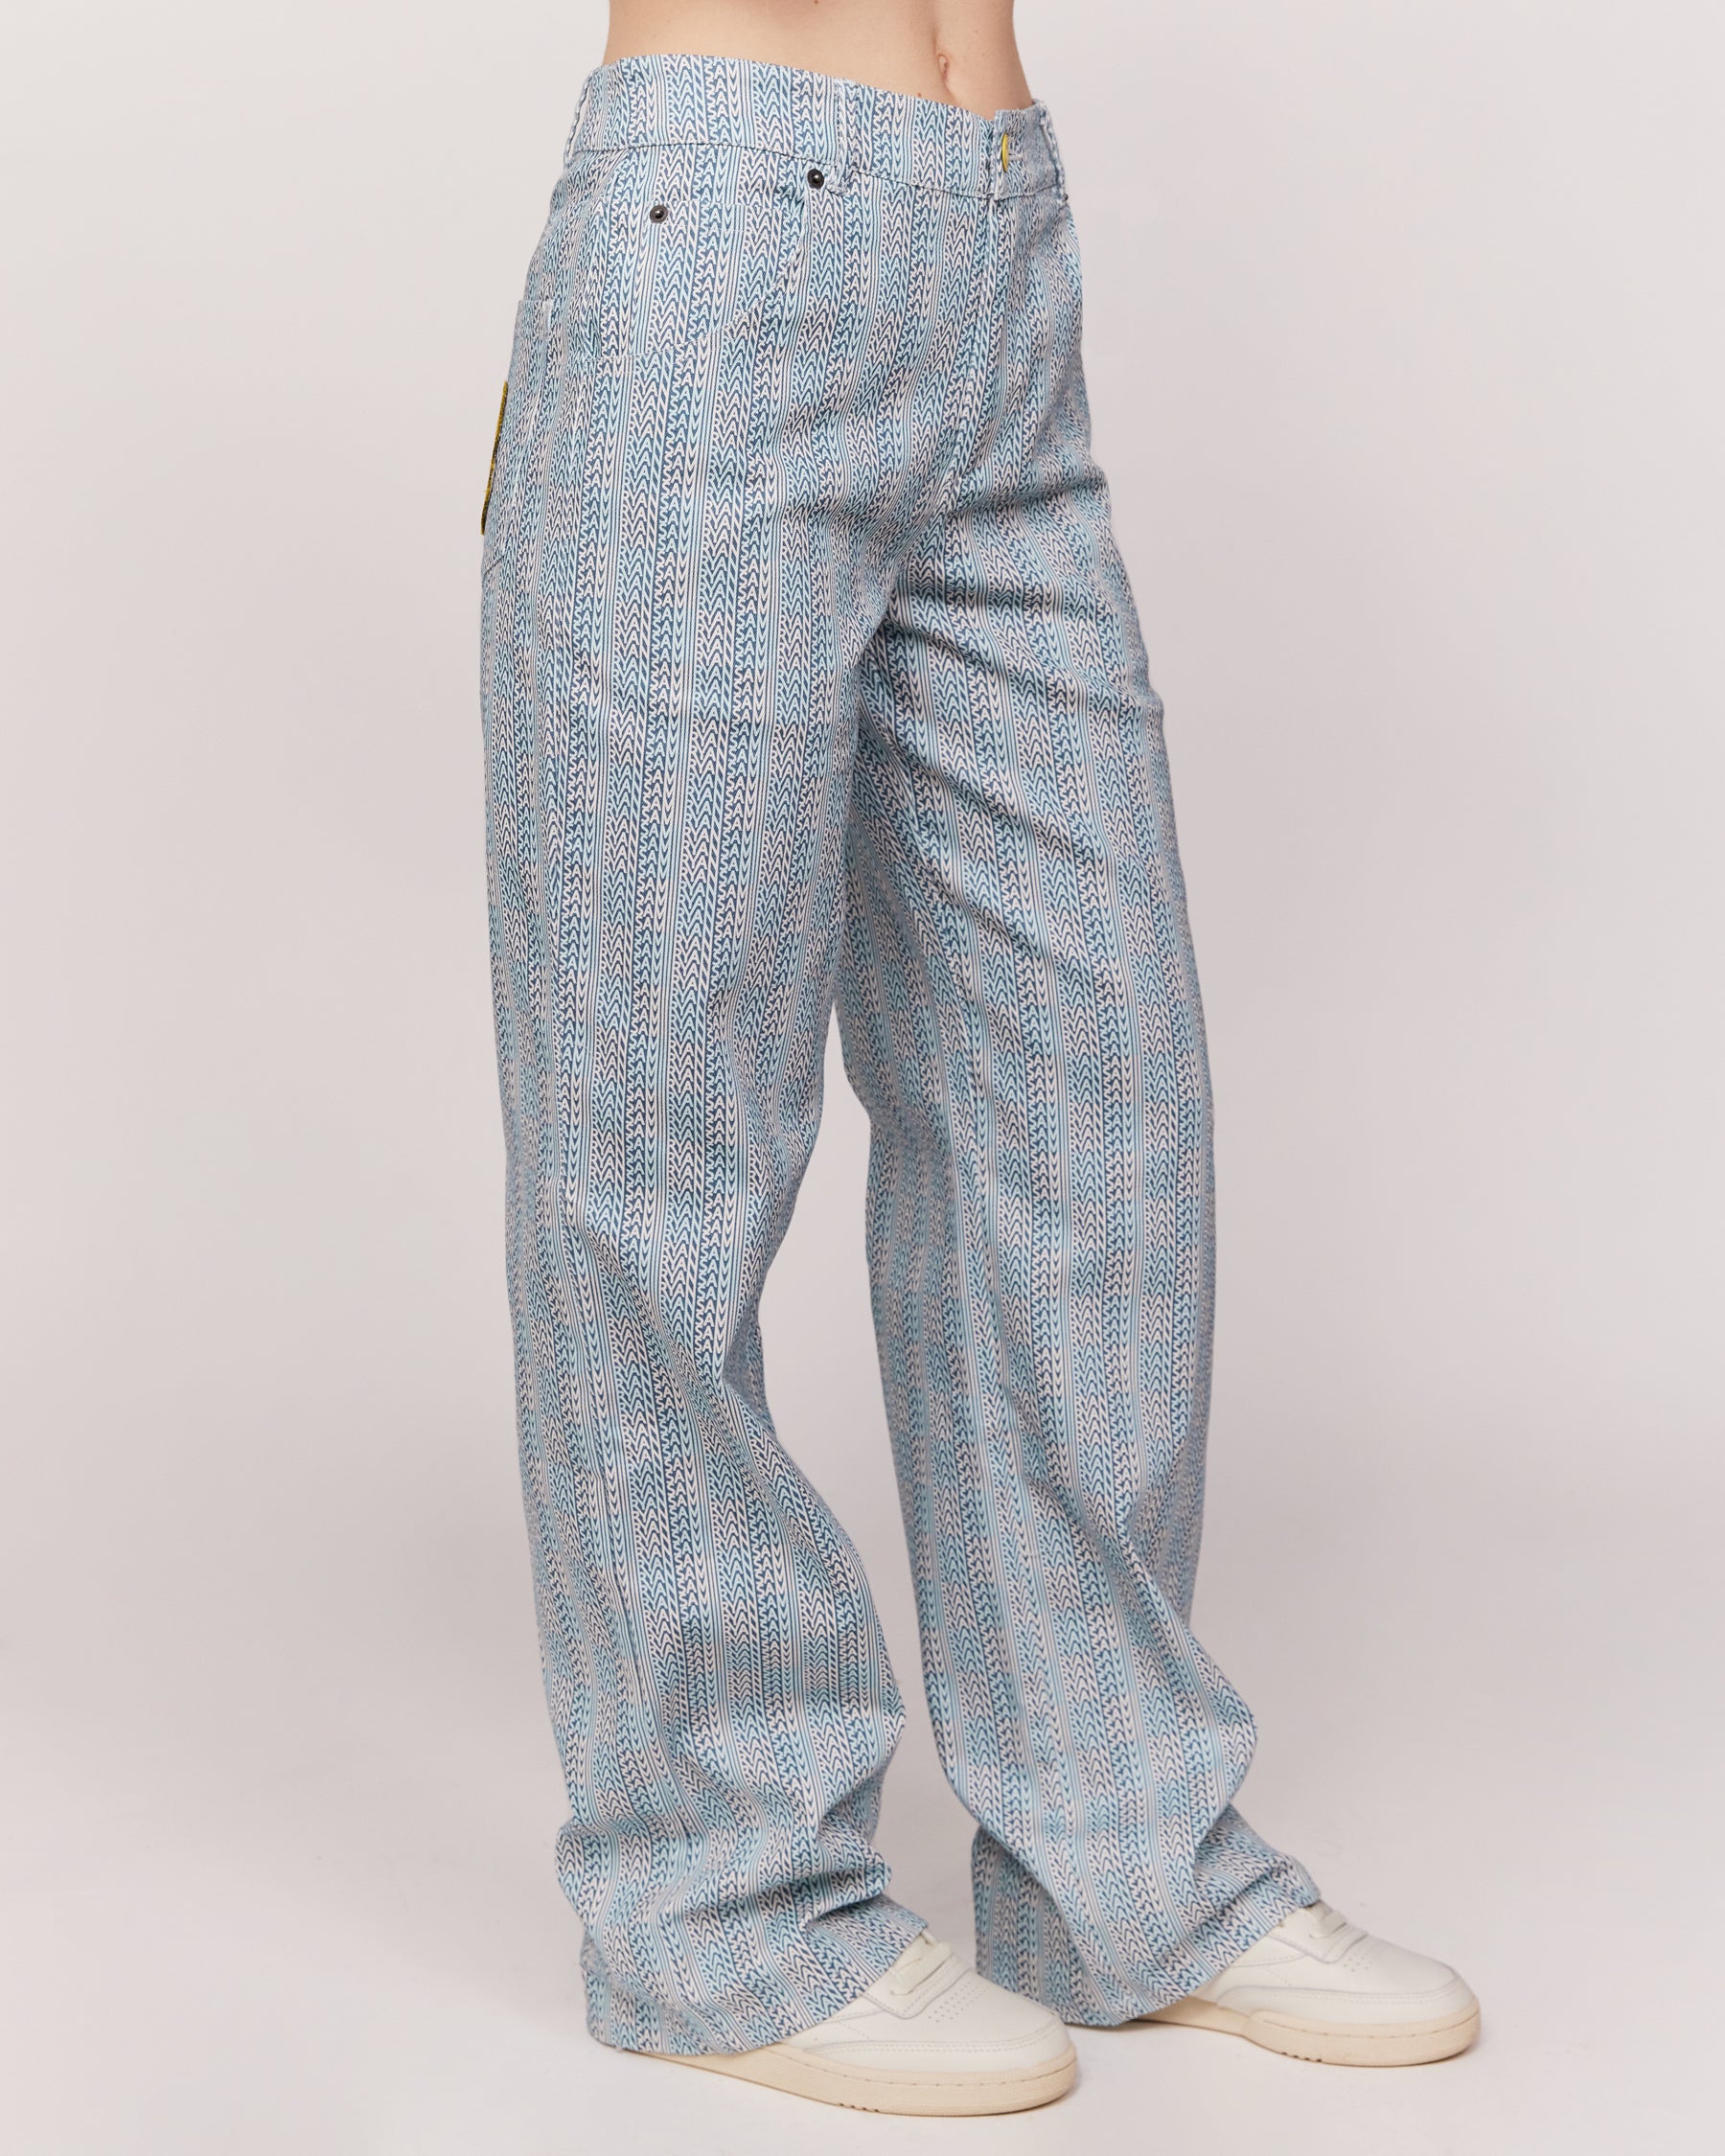 checkered pants with smiley face patch